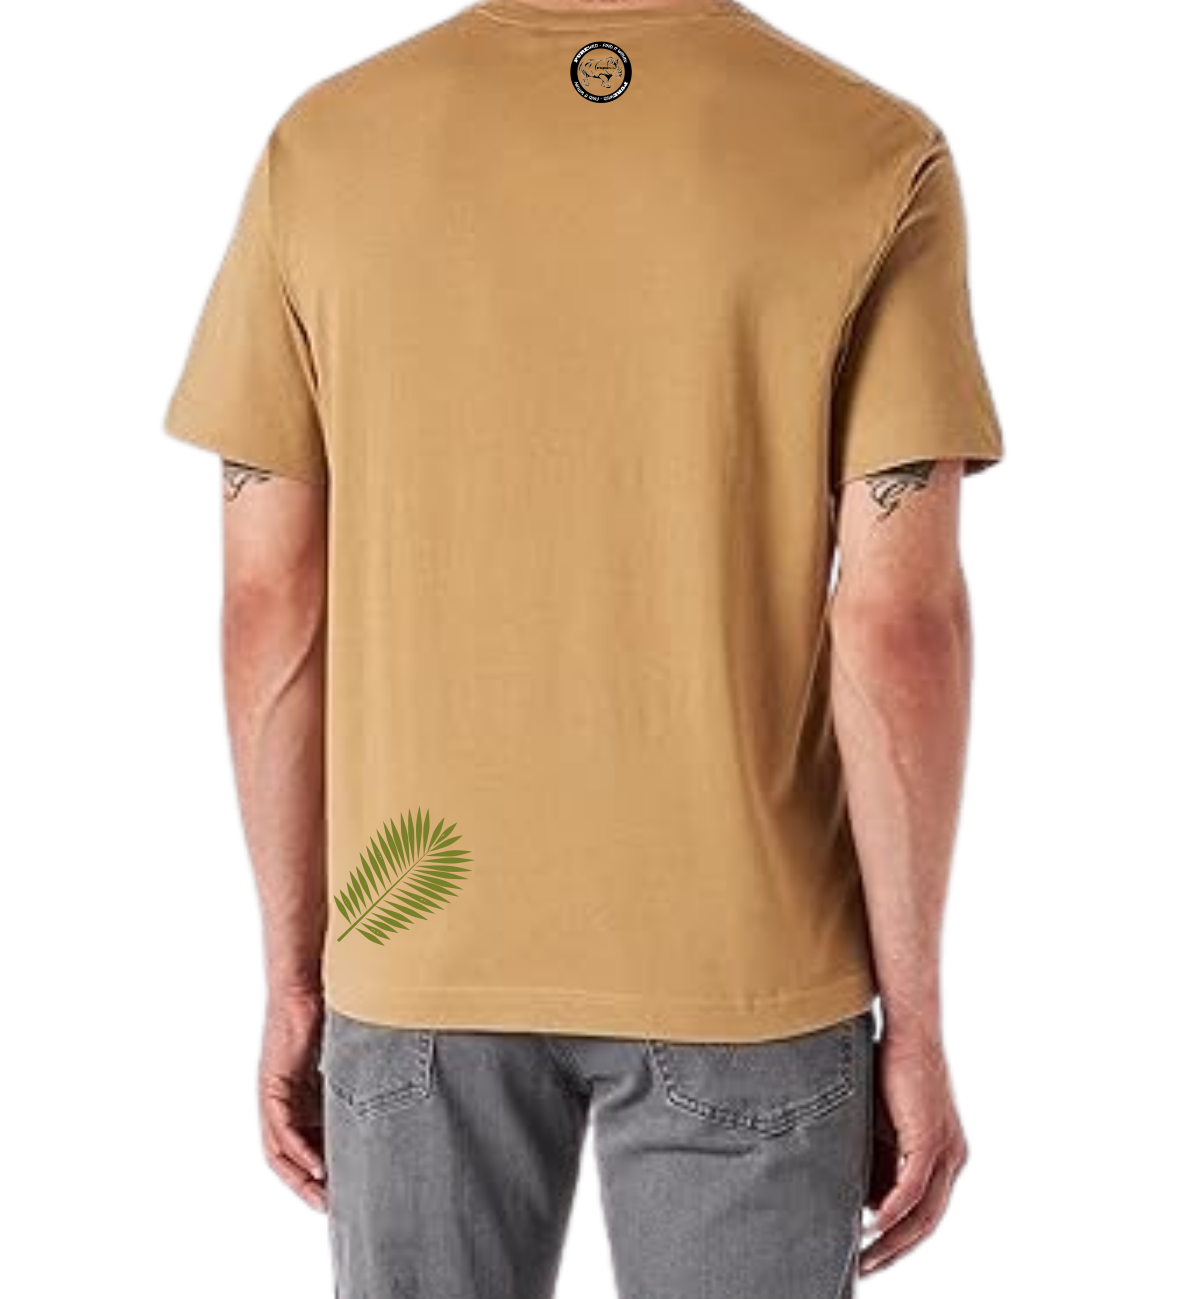 Camel Thorn  Tree T-Shirt For A Real Man